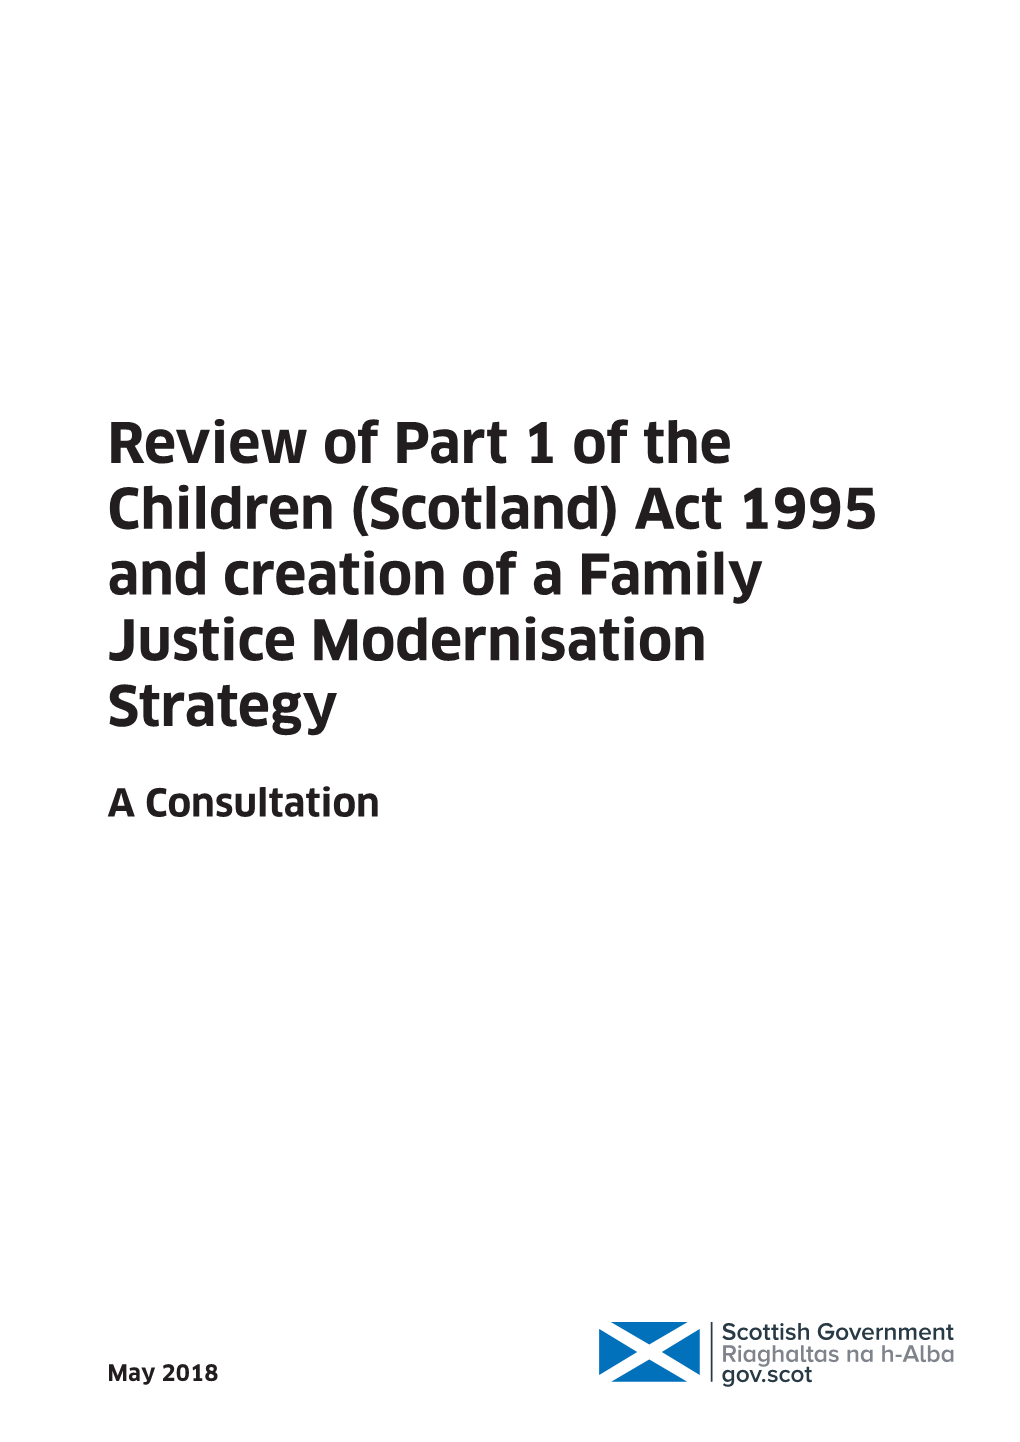 (Scotland) Act 1995 and Creation of a Family Justice Modernisation Strategy